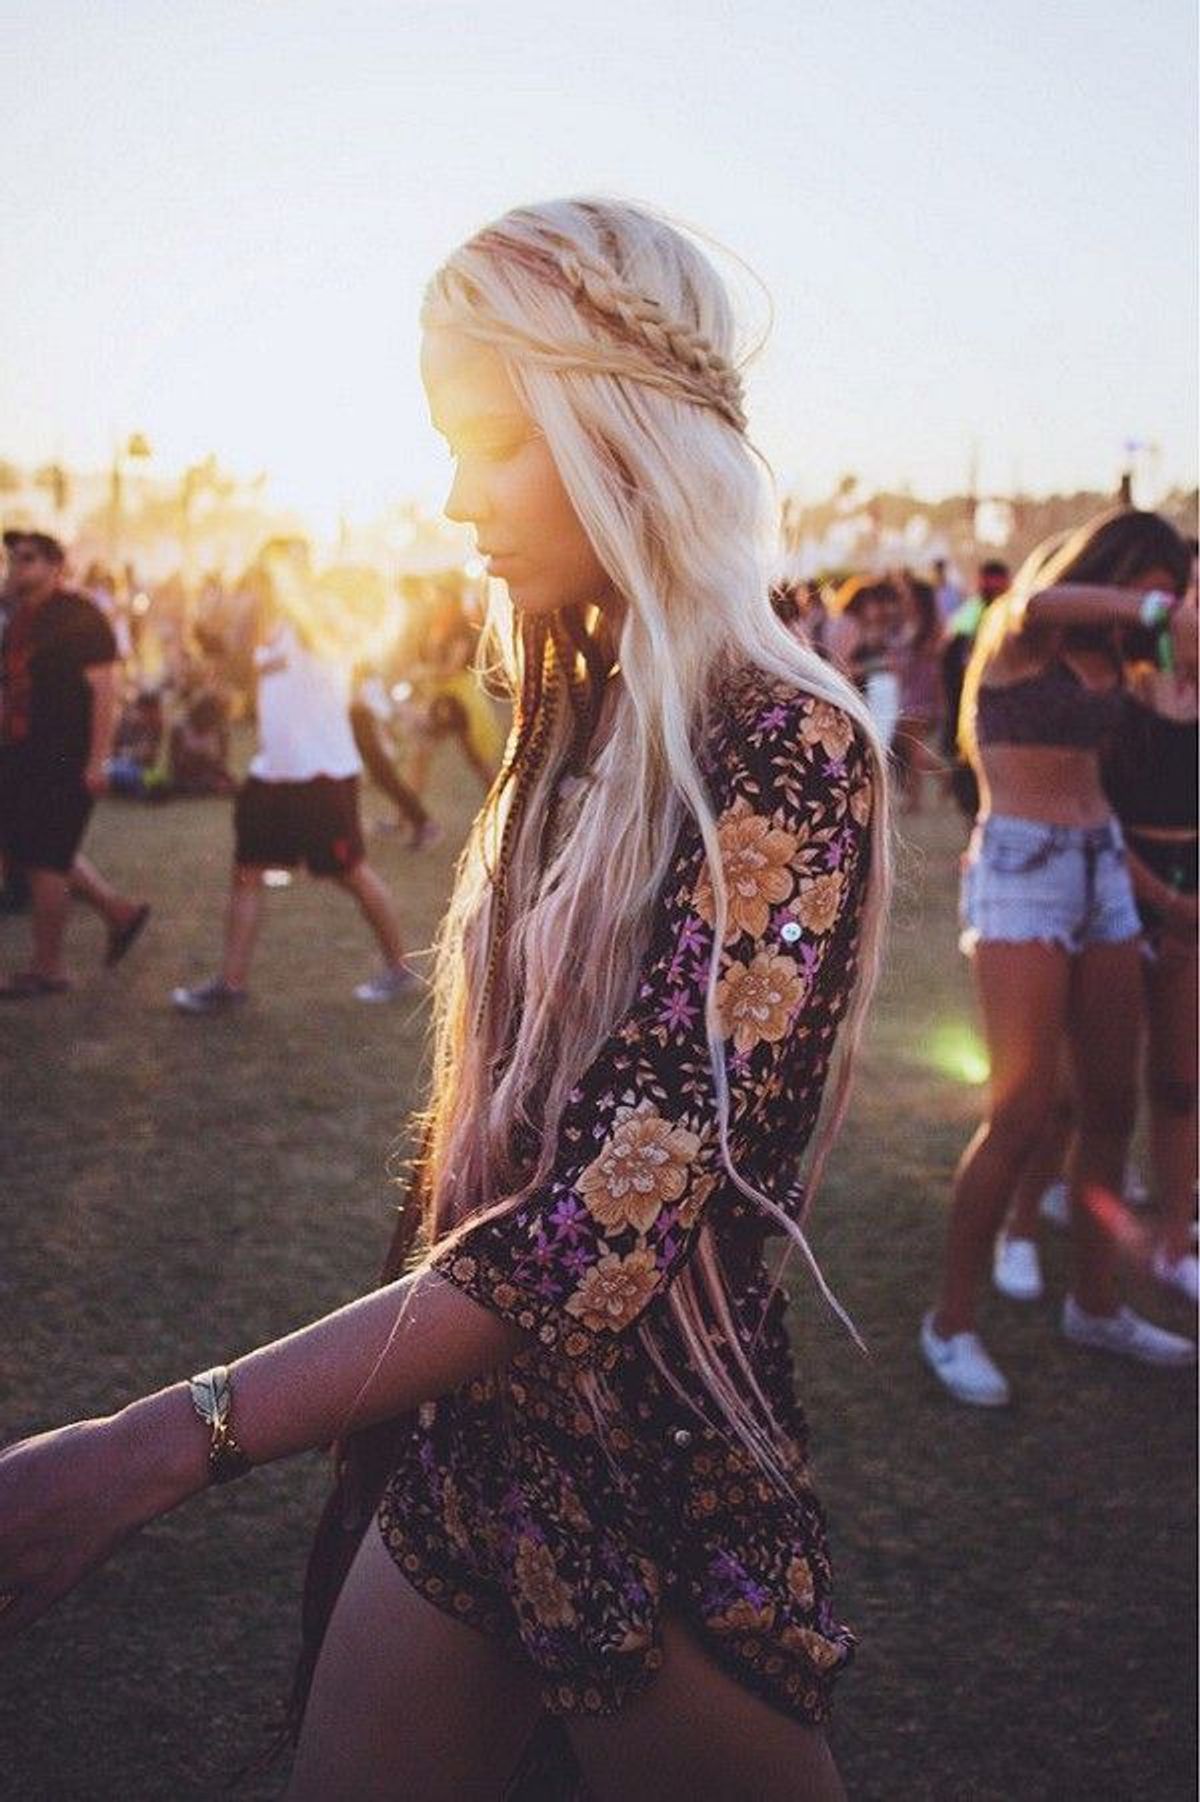 How To Stop Putting The '60s To Shame With Your "Festival Fashion"